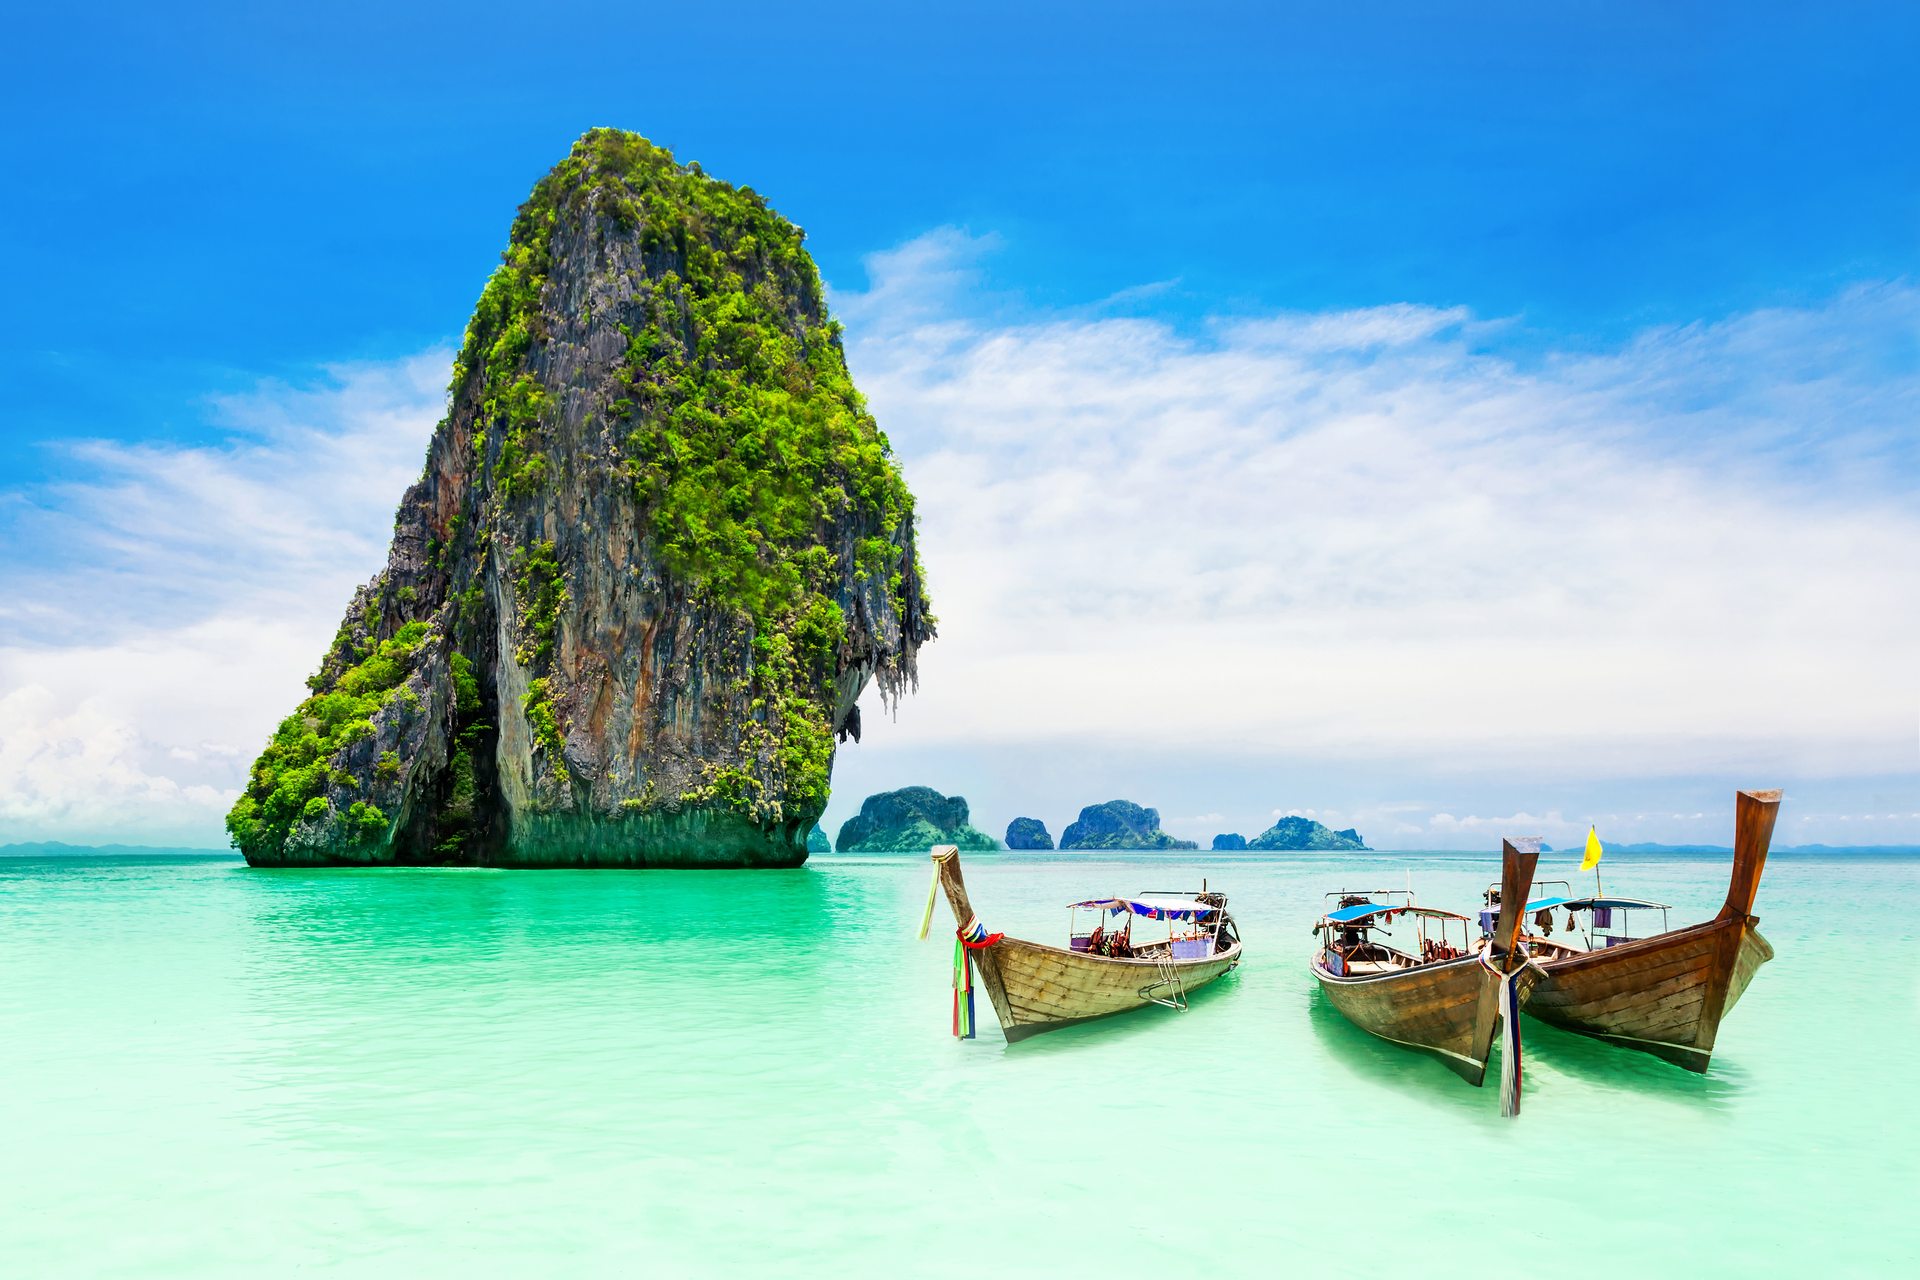 Longtail boats at a beach in Thailand, where clear water and white sand make it one of the best places to learn to scuba dive